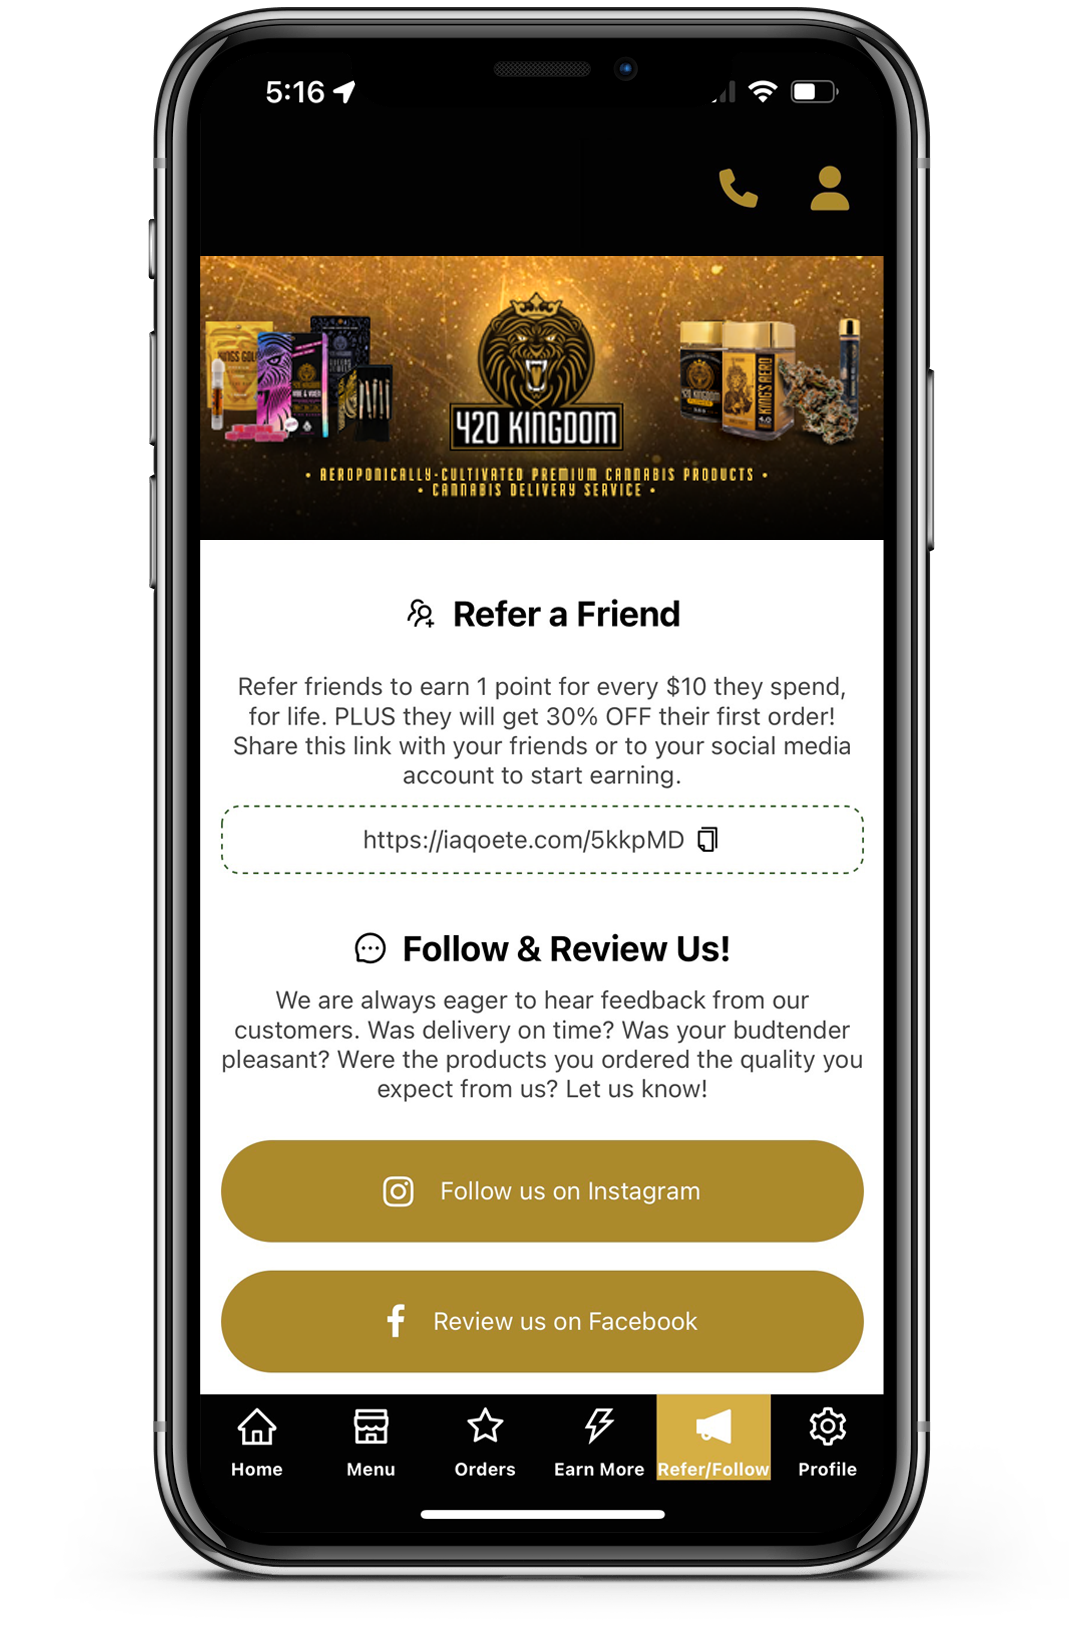 App Referral Page